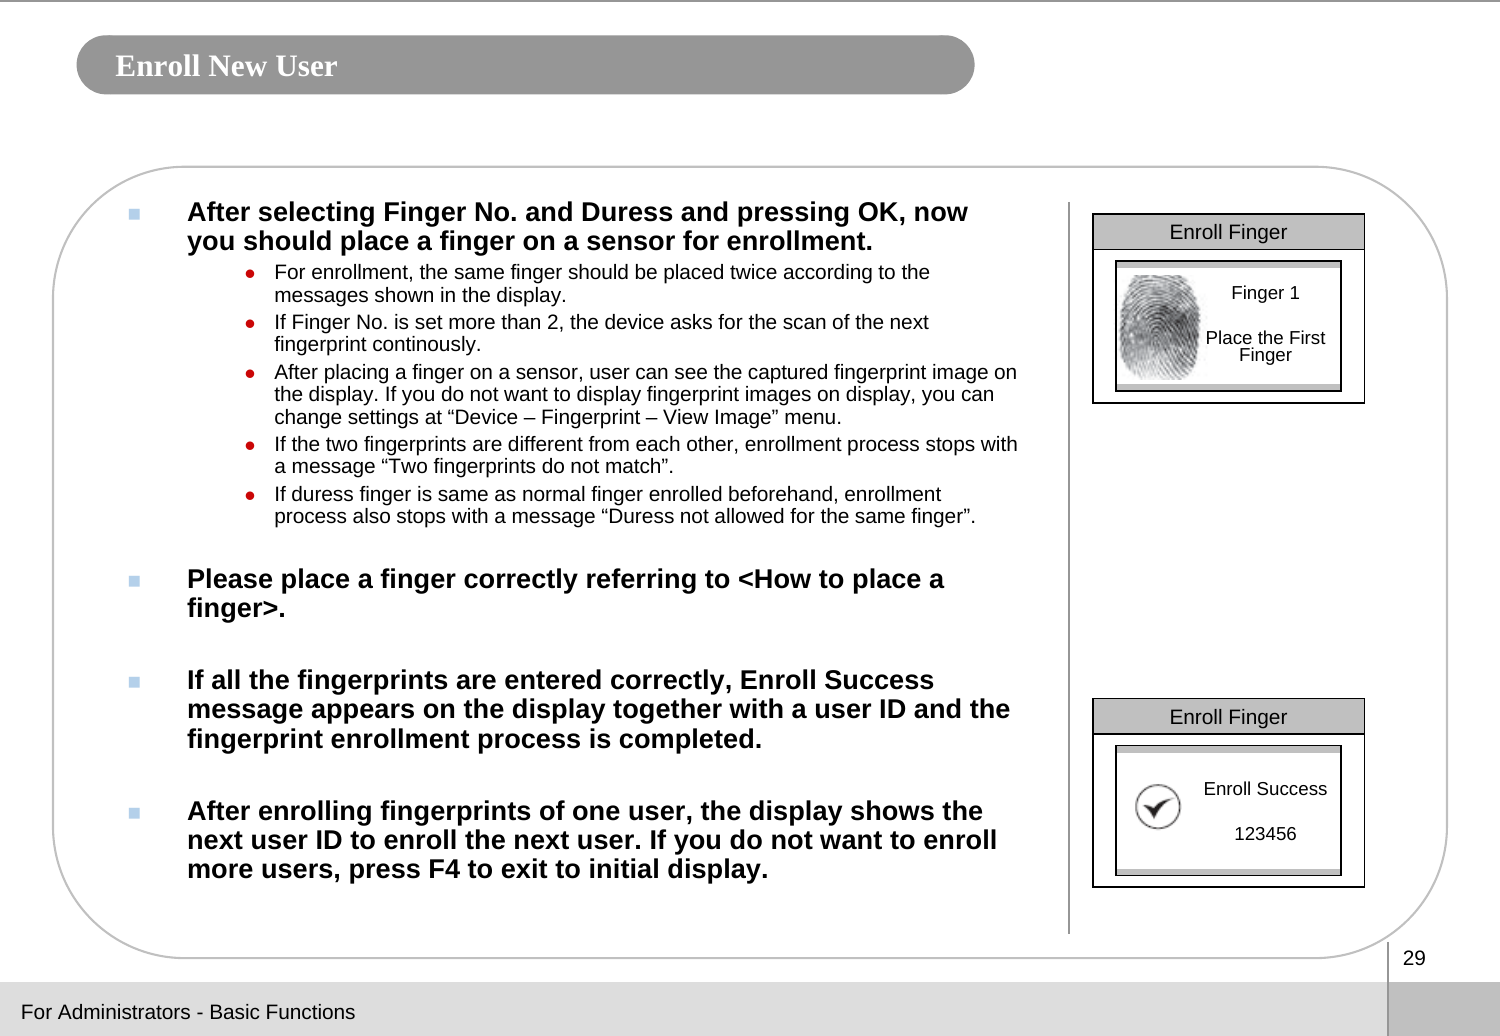 29Enroll New UserAfter selecting Finger No. and Duress and pressing OK, now you should place a finger on a sensor for enrollment.zFor enrollment, the same finger should be placed twice according to the messages shown in the display. zIf Finger No. is set more than 2, the device asks for the scan of the next fingerprint continously.zAfter placing a finger on a sensor, user can see the captured fingerprint image on the display. If you do not want to display fingerprint images on display, you can change settings at “Device – Fingerprint – View Image” menu.zIf the two fingerprints are different from each other, enrollment process stops with a message “Two fingerprints do not match”.zIf duress finger is same as normal finger enrolled beforehand, enrollment process also stops with a message “Duress not allowed for the same finger”. Please place a finger correctly referring to &lt;How to place a finger&gt;.If all the fingerprints are entered correctly, Enroll Success message appears on the display together with a user ID and the fingerprint enrollment process is completed. After enrolling fingerprints of one user, the display shows the next user ID to enroll the next user. If you do not want to enroll more users, press F4 to exit to initial display.Enroll FingerFinger 1Place the First FingerEnroll FingerEnroll Success123456For Administrators - Basic Functions